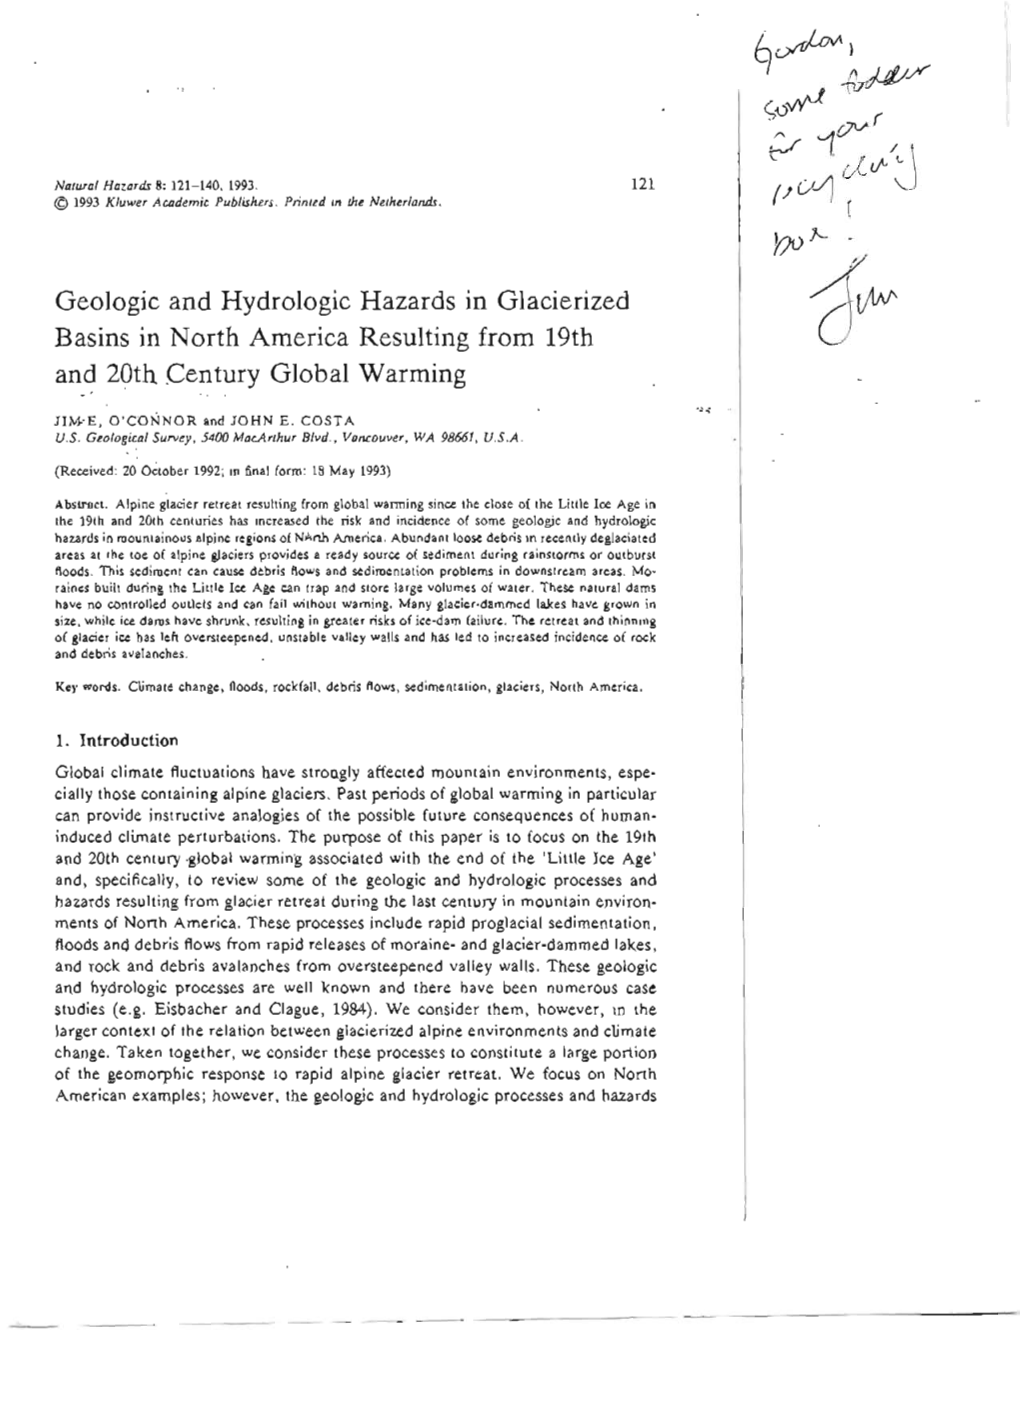 Geologic and Hydrologic Hazards in Glacierized Basins in North America Resulting from 19Th and 20Th Century Global Warming